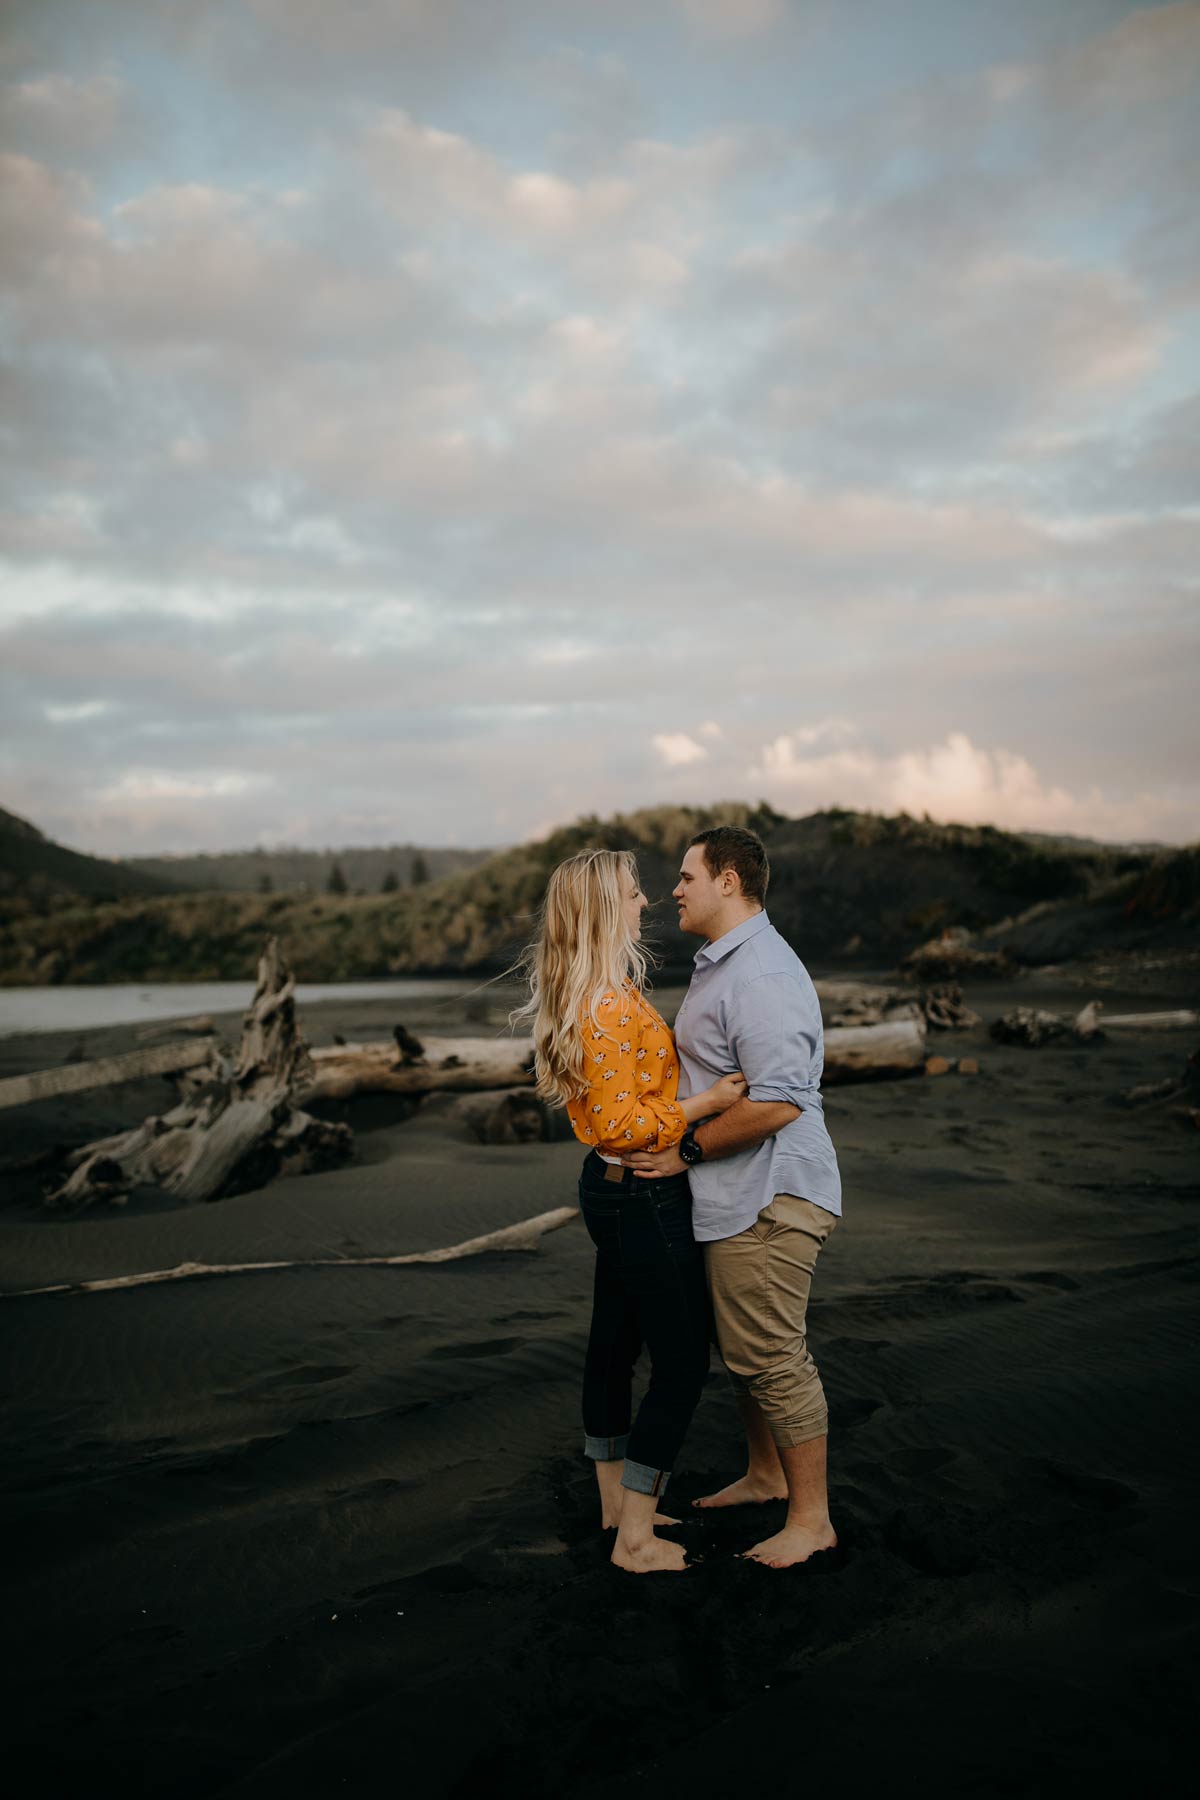 couple embracing at muriwai beach auckland new zealand during a golden light evening lifestyle engagment pre-wedding photoshoot session by sarah weber photography